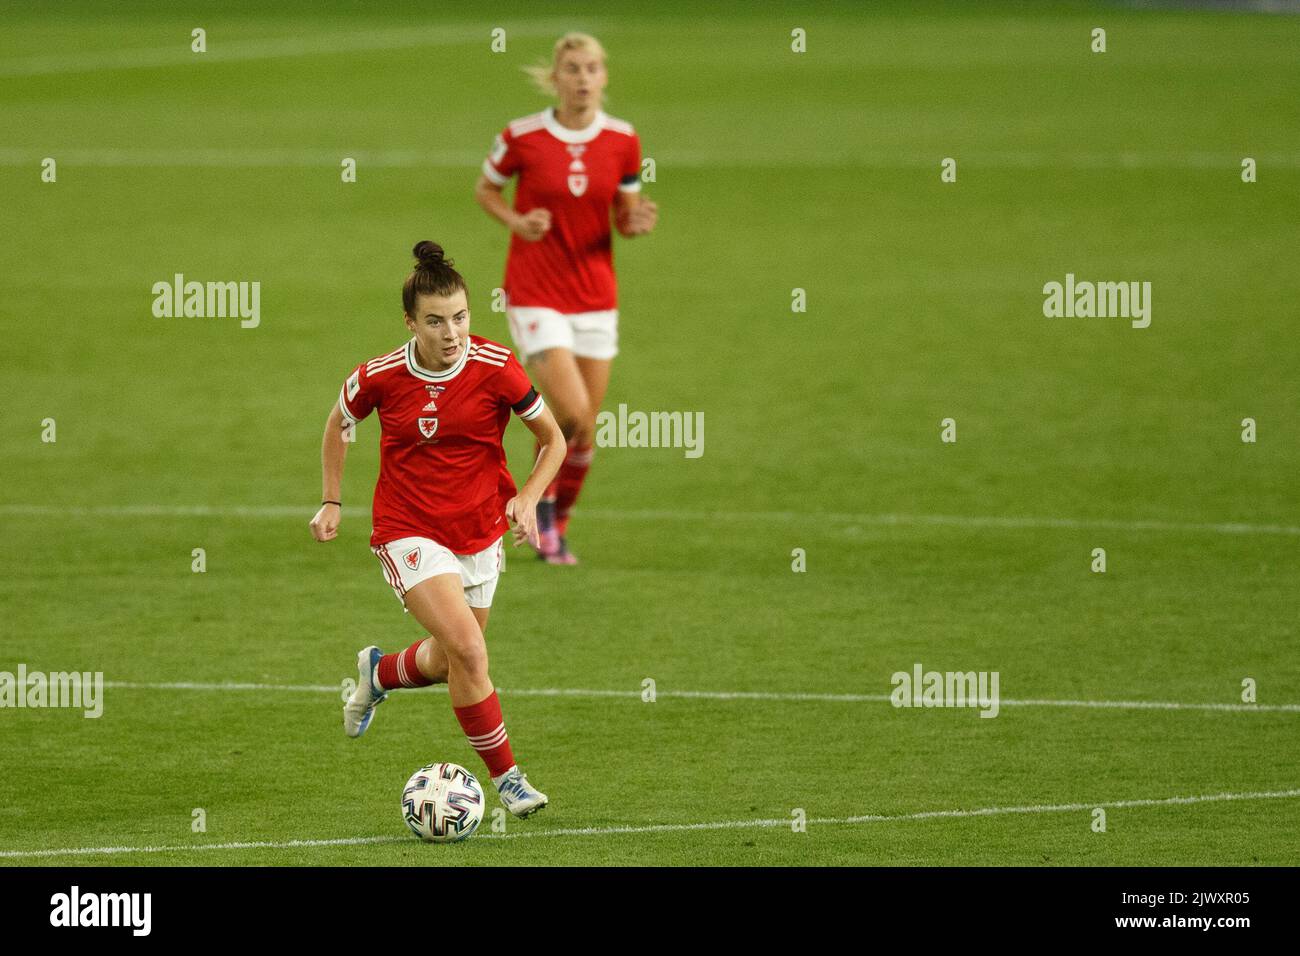 Cardiff, UK. 6th Sep, 2022. Angharad James of Wales during the Wales v Slovenia Women's World Cup Qualification match. Credit: Gruffydd Thomas/Alamy Live News Stock Photo